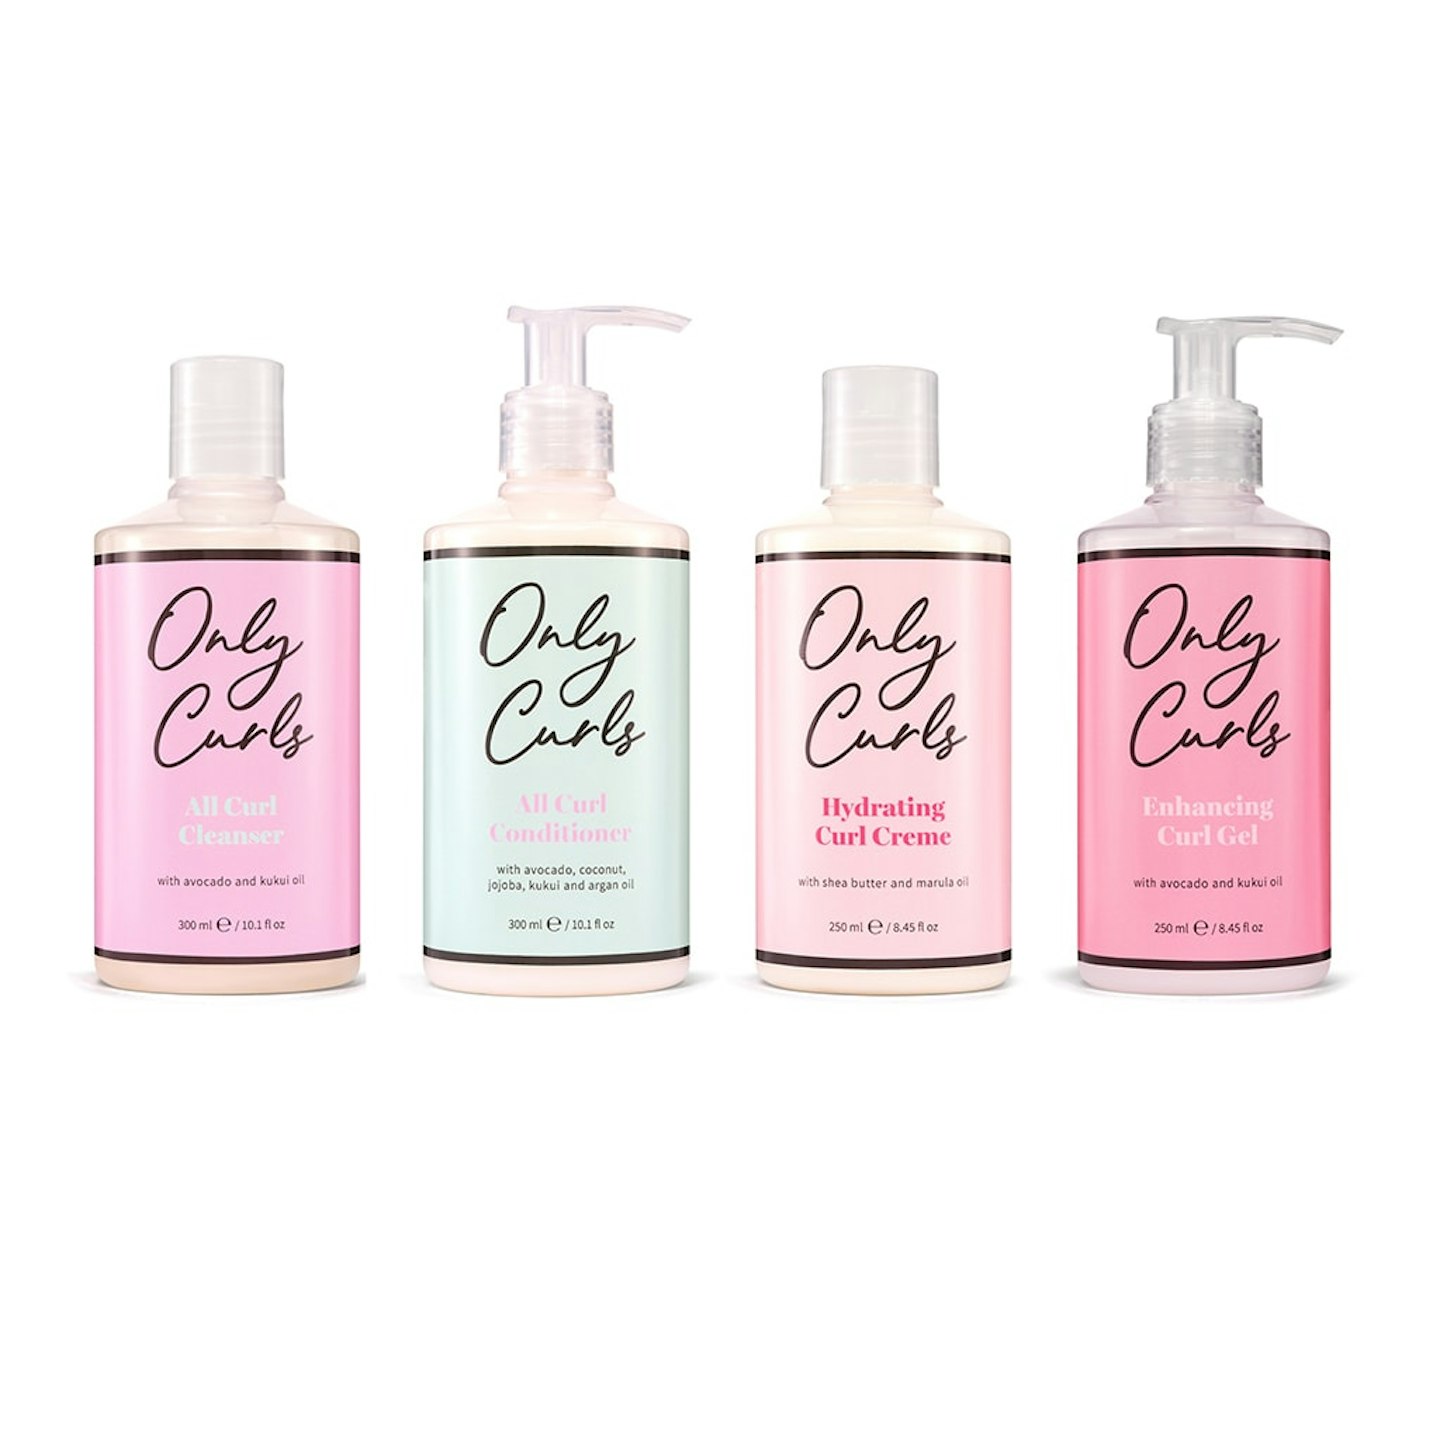 Only Curls Full Size Bundle